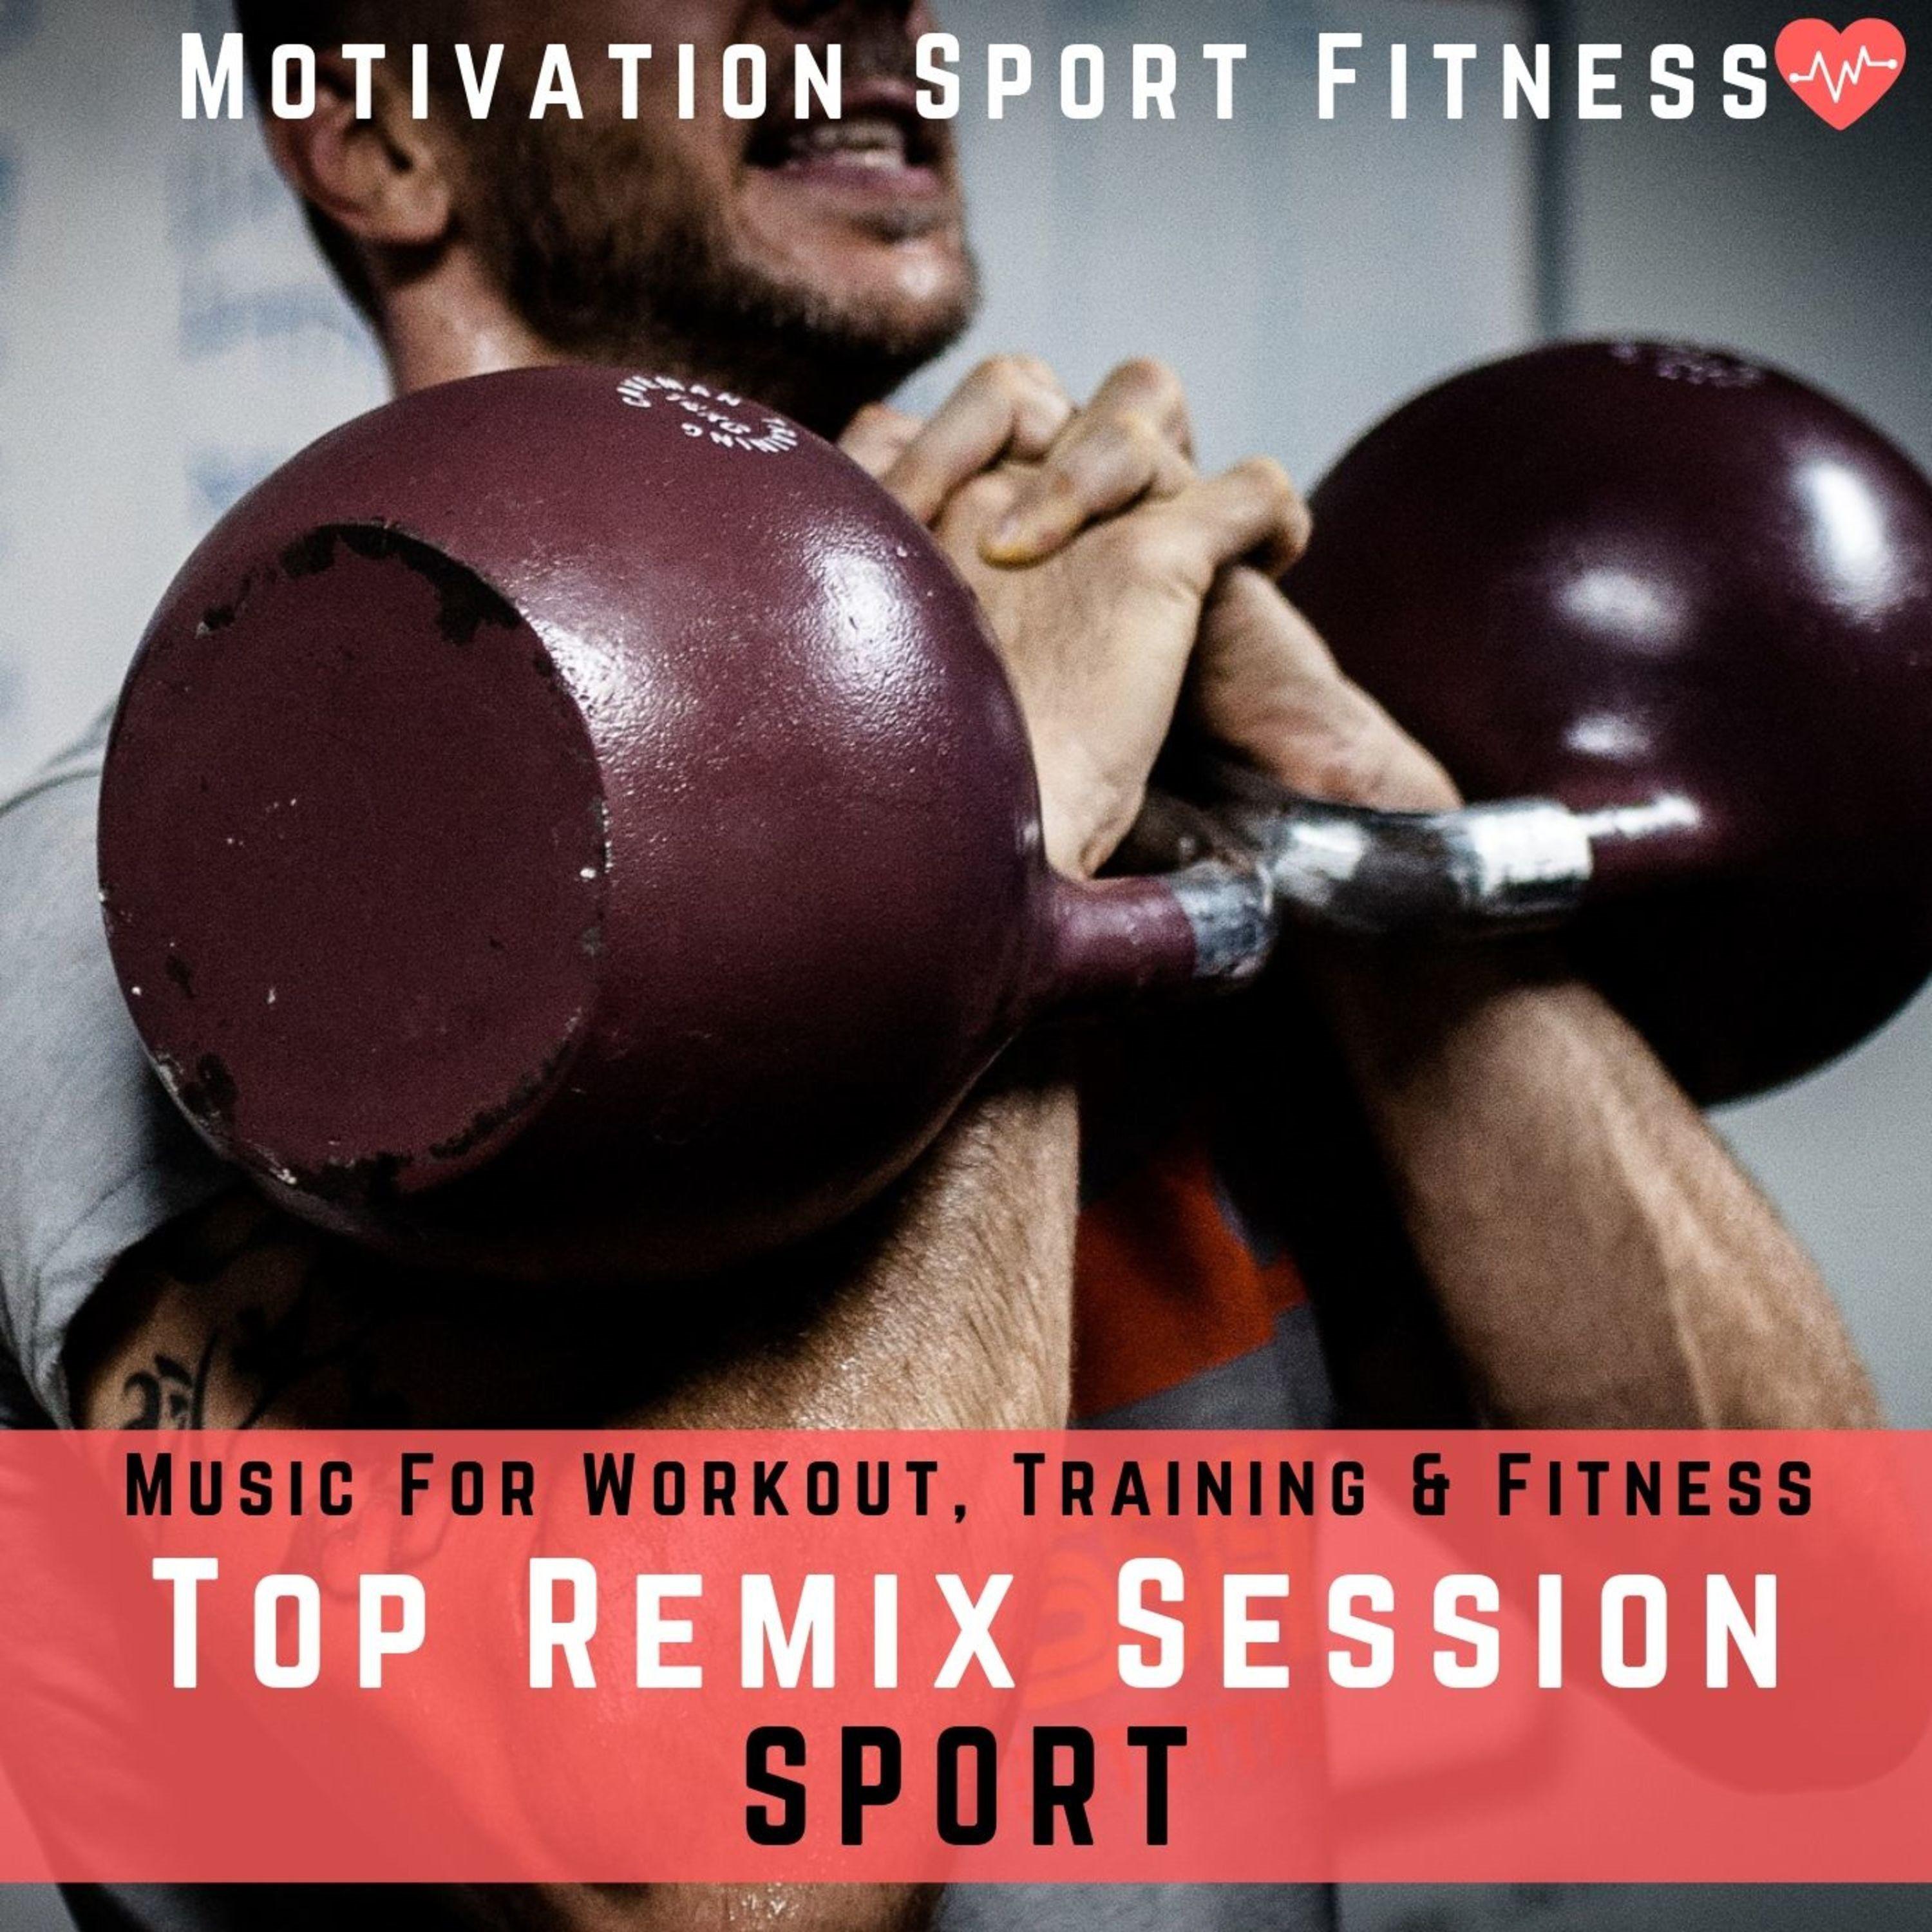 Top Remix Session Sport (Music for Workout, Training & Fitness)